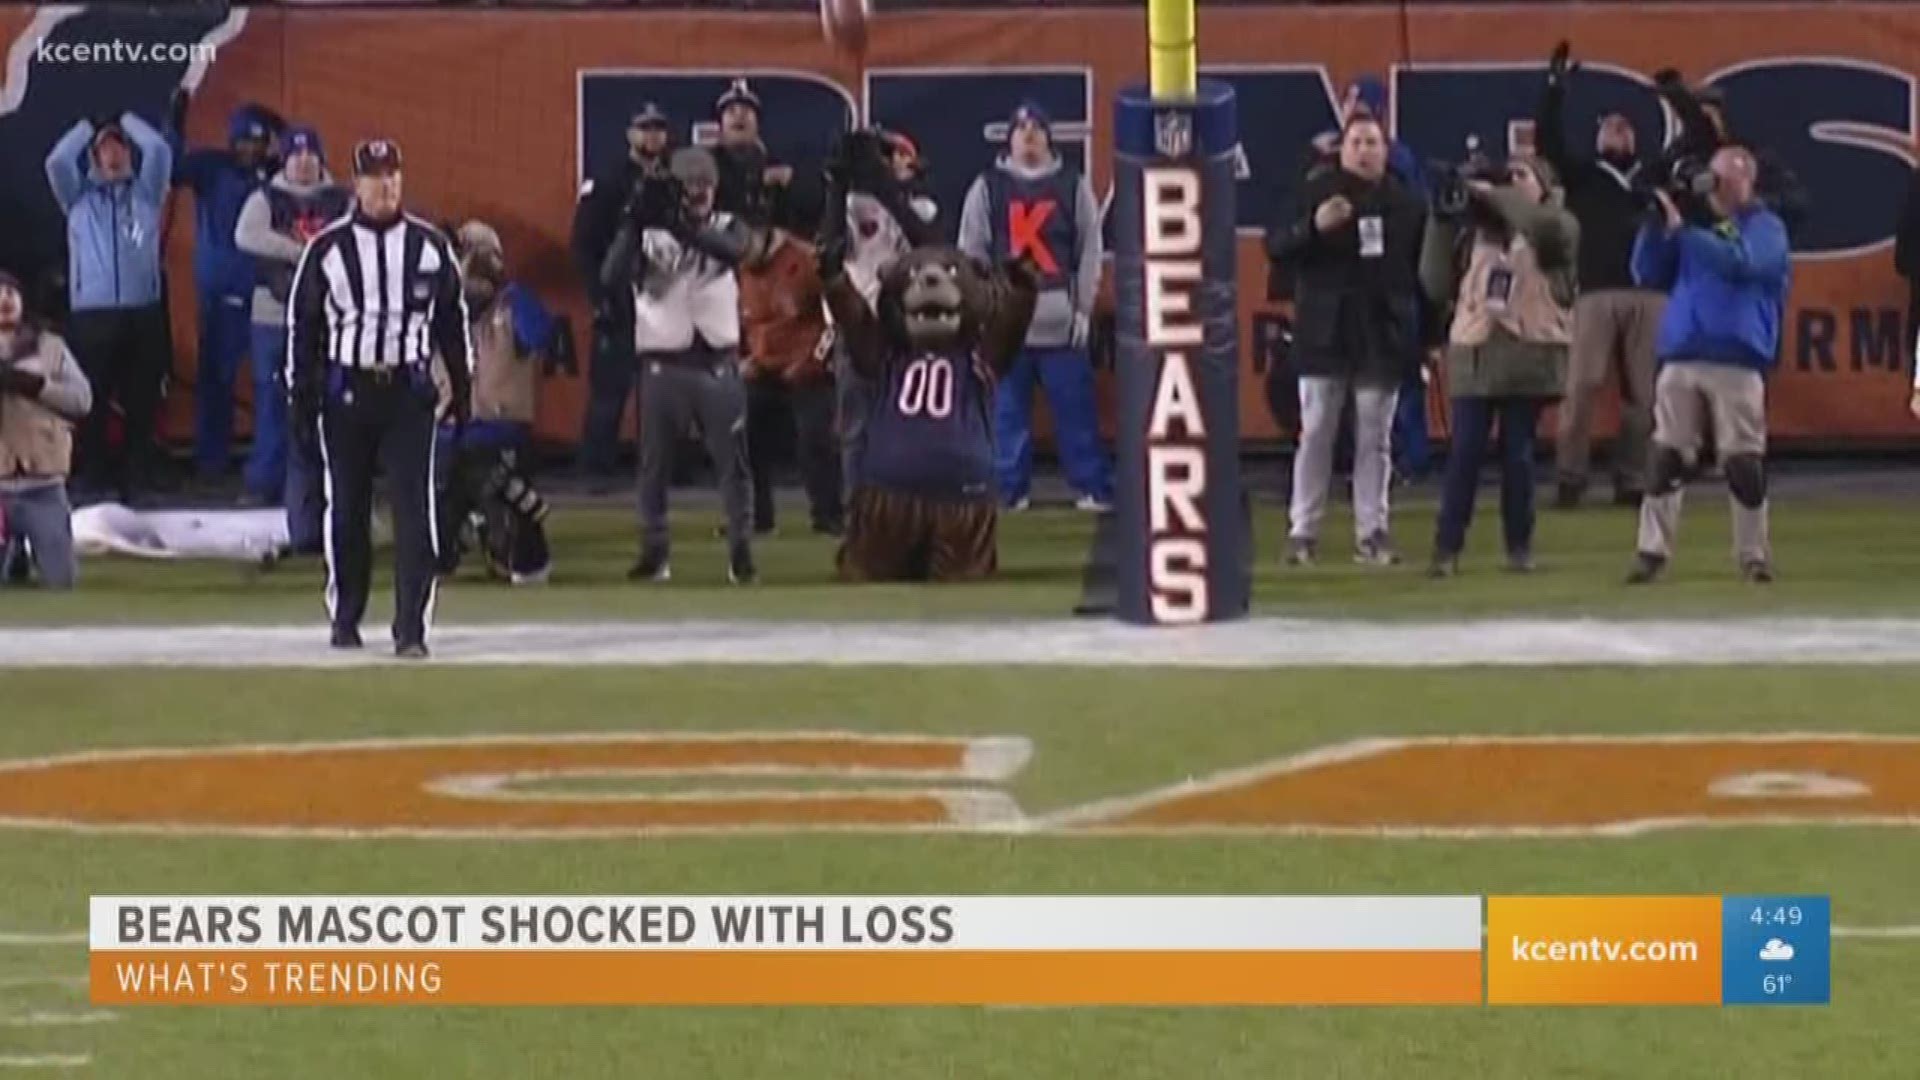 The Chicago Bears mascot was caught on camera dropping to the ground after the team's kicker missed a winning field goal during Sunday night's game. Plus, our morning team has highlights from The Golden Globe Awards.